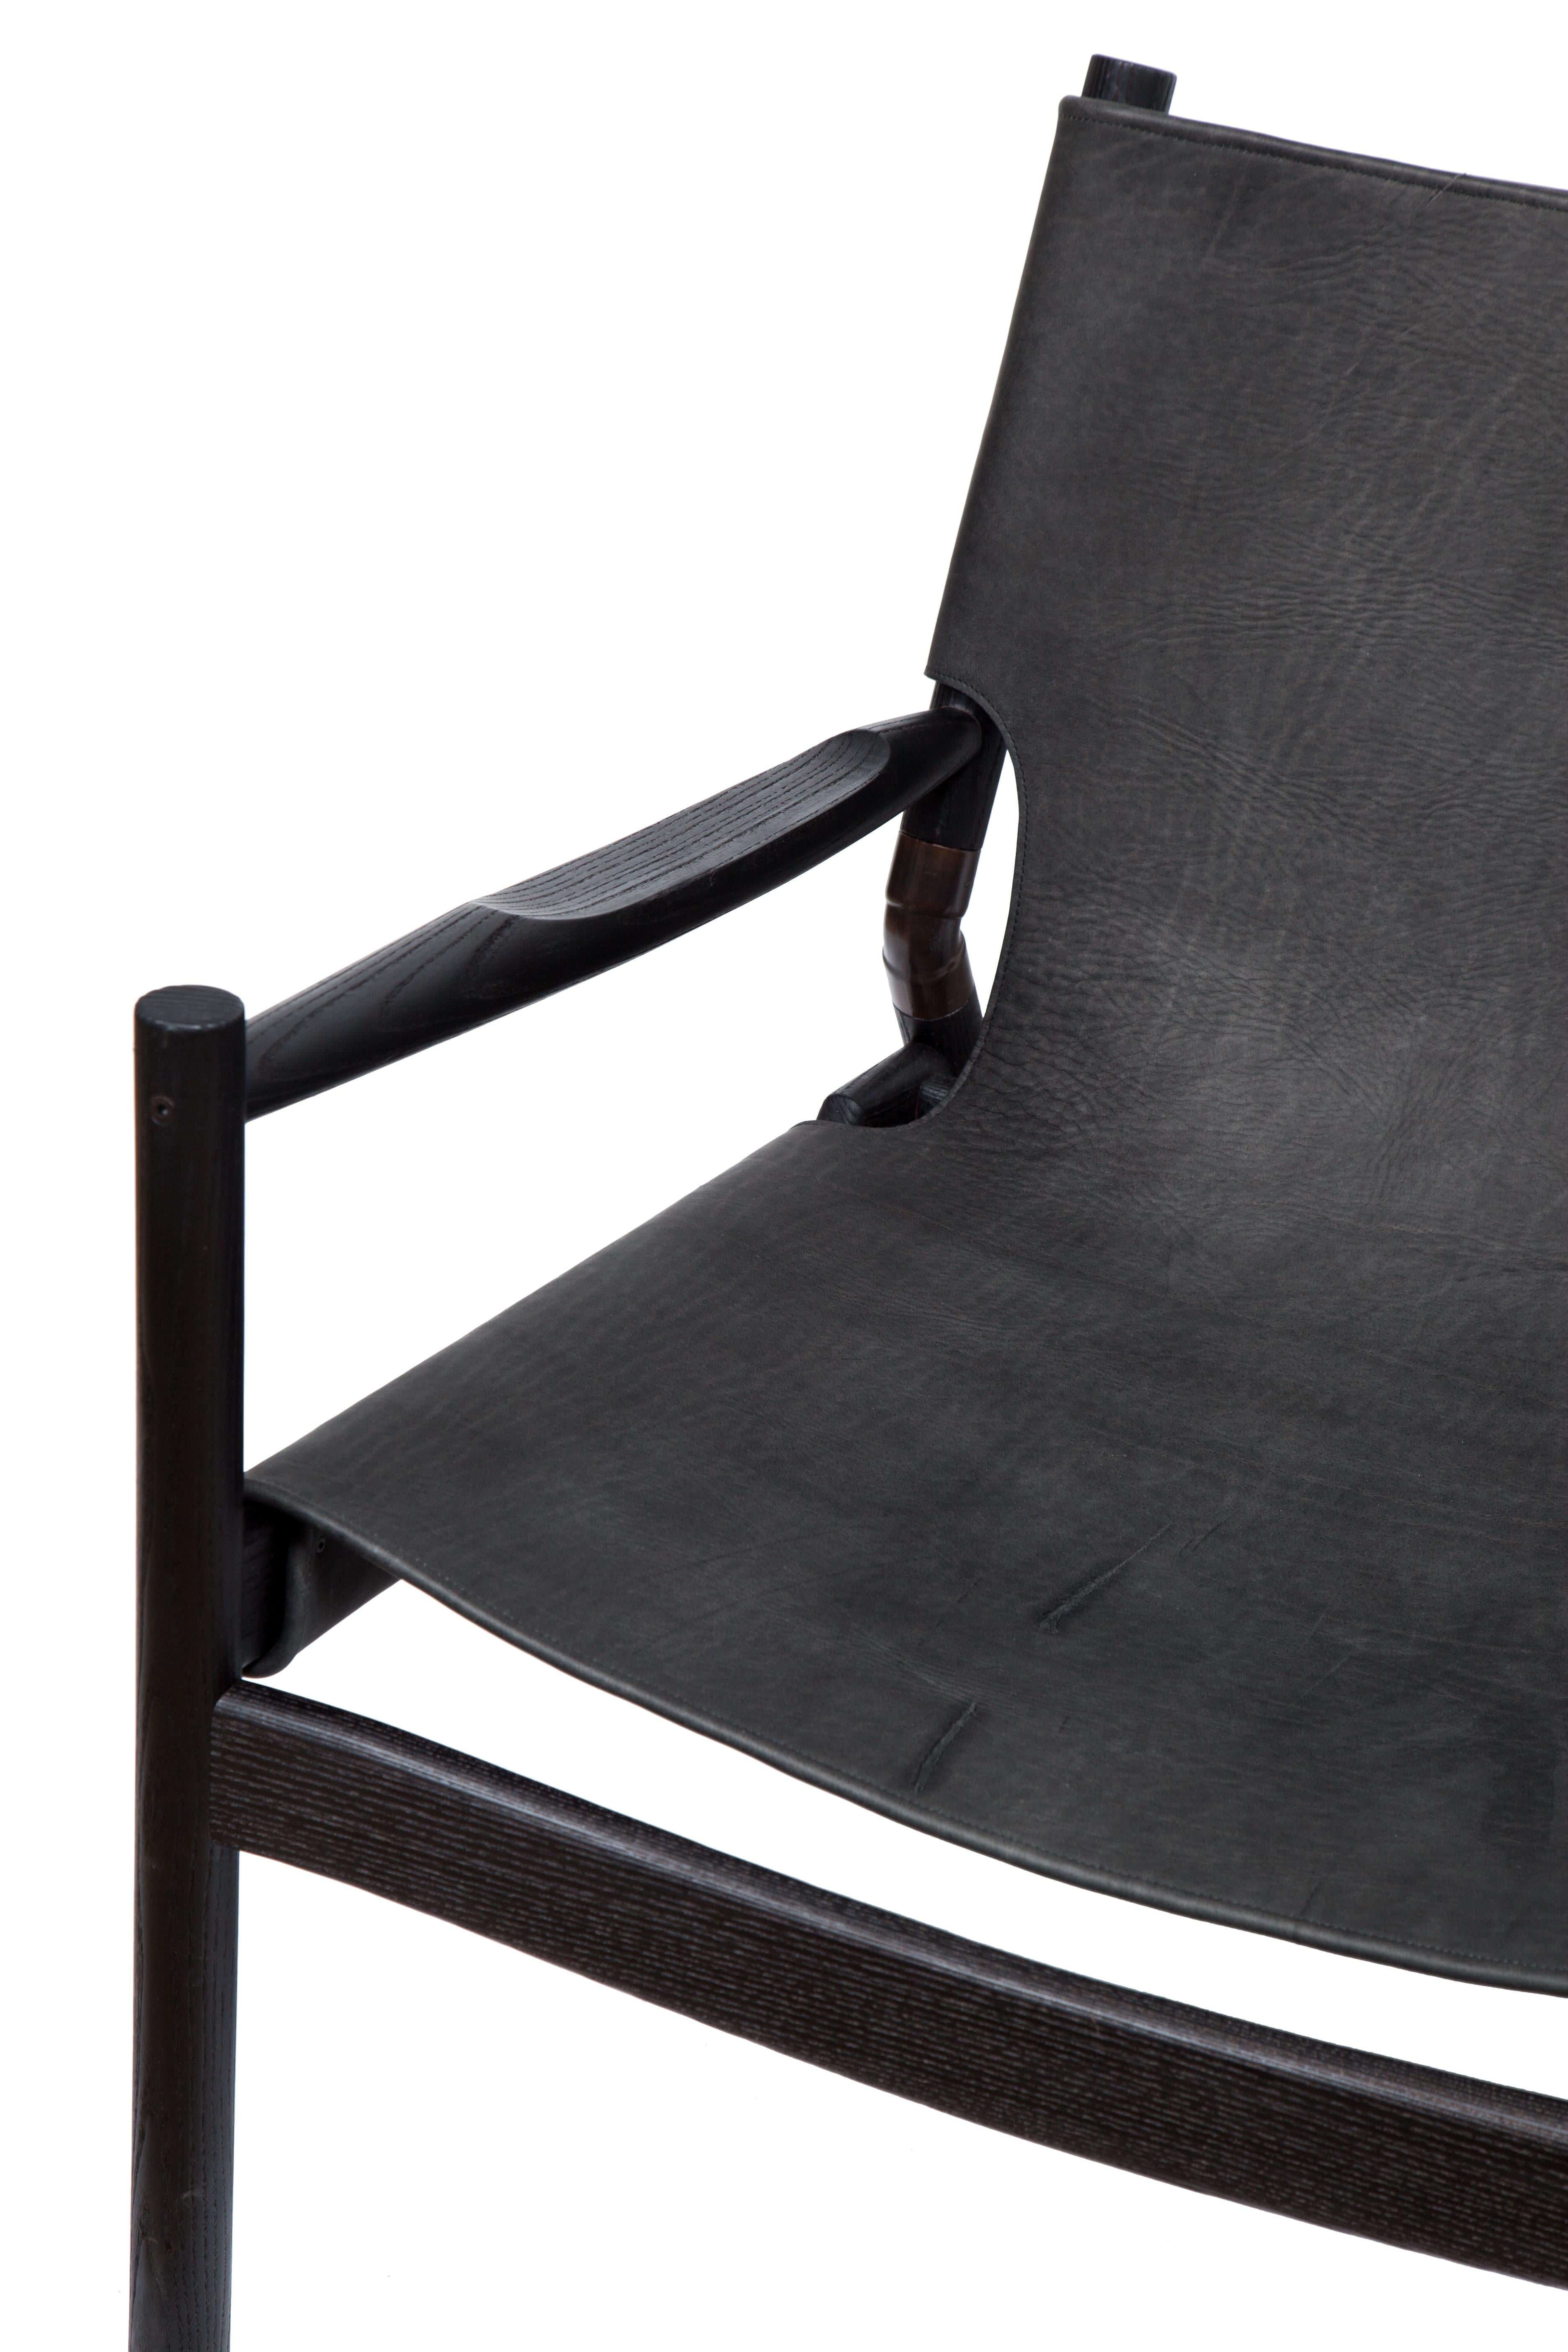 EÆ Slung leather lounge chair in Anthracite Horween nubuck leather with charred oak frame and blackened brass hardware by Erickson Aesthetics.